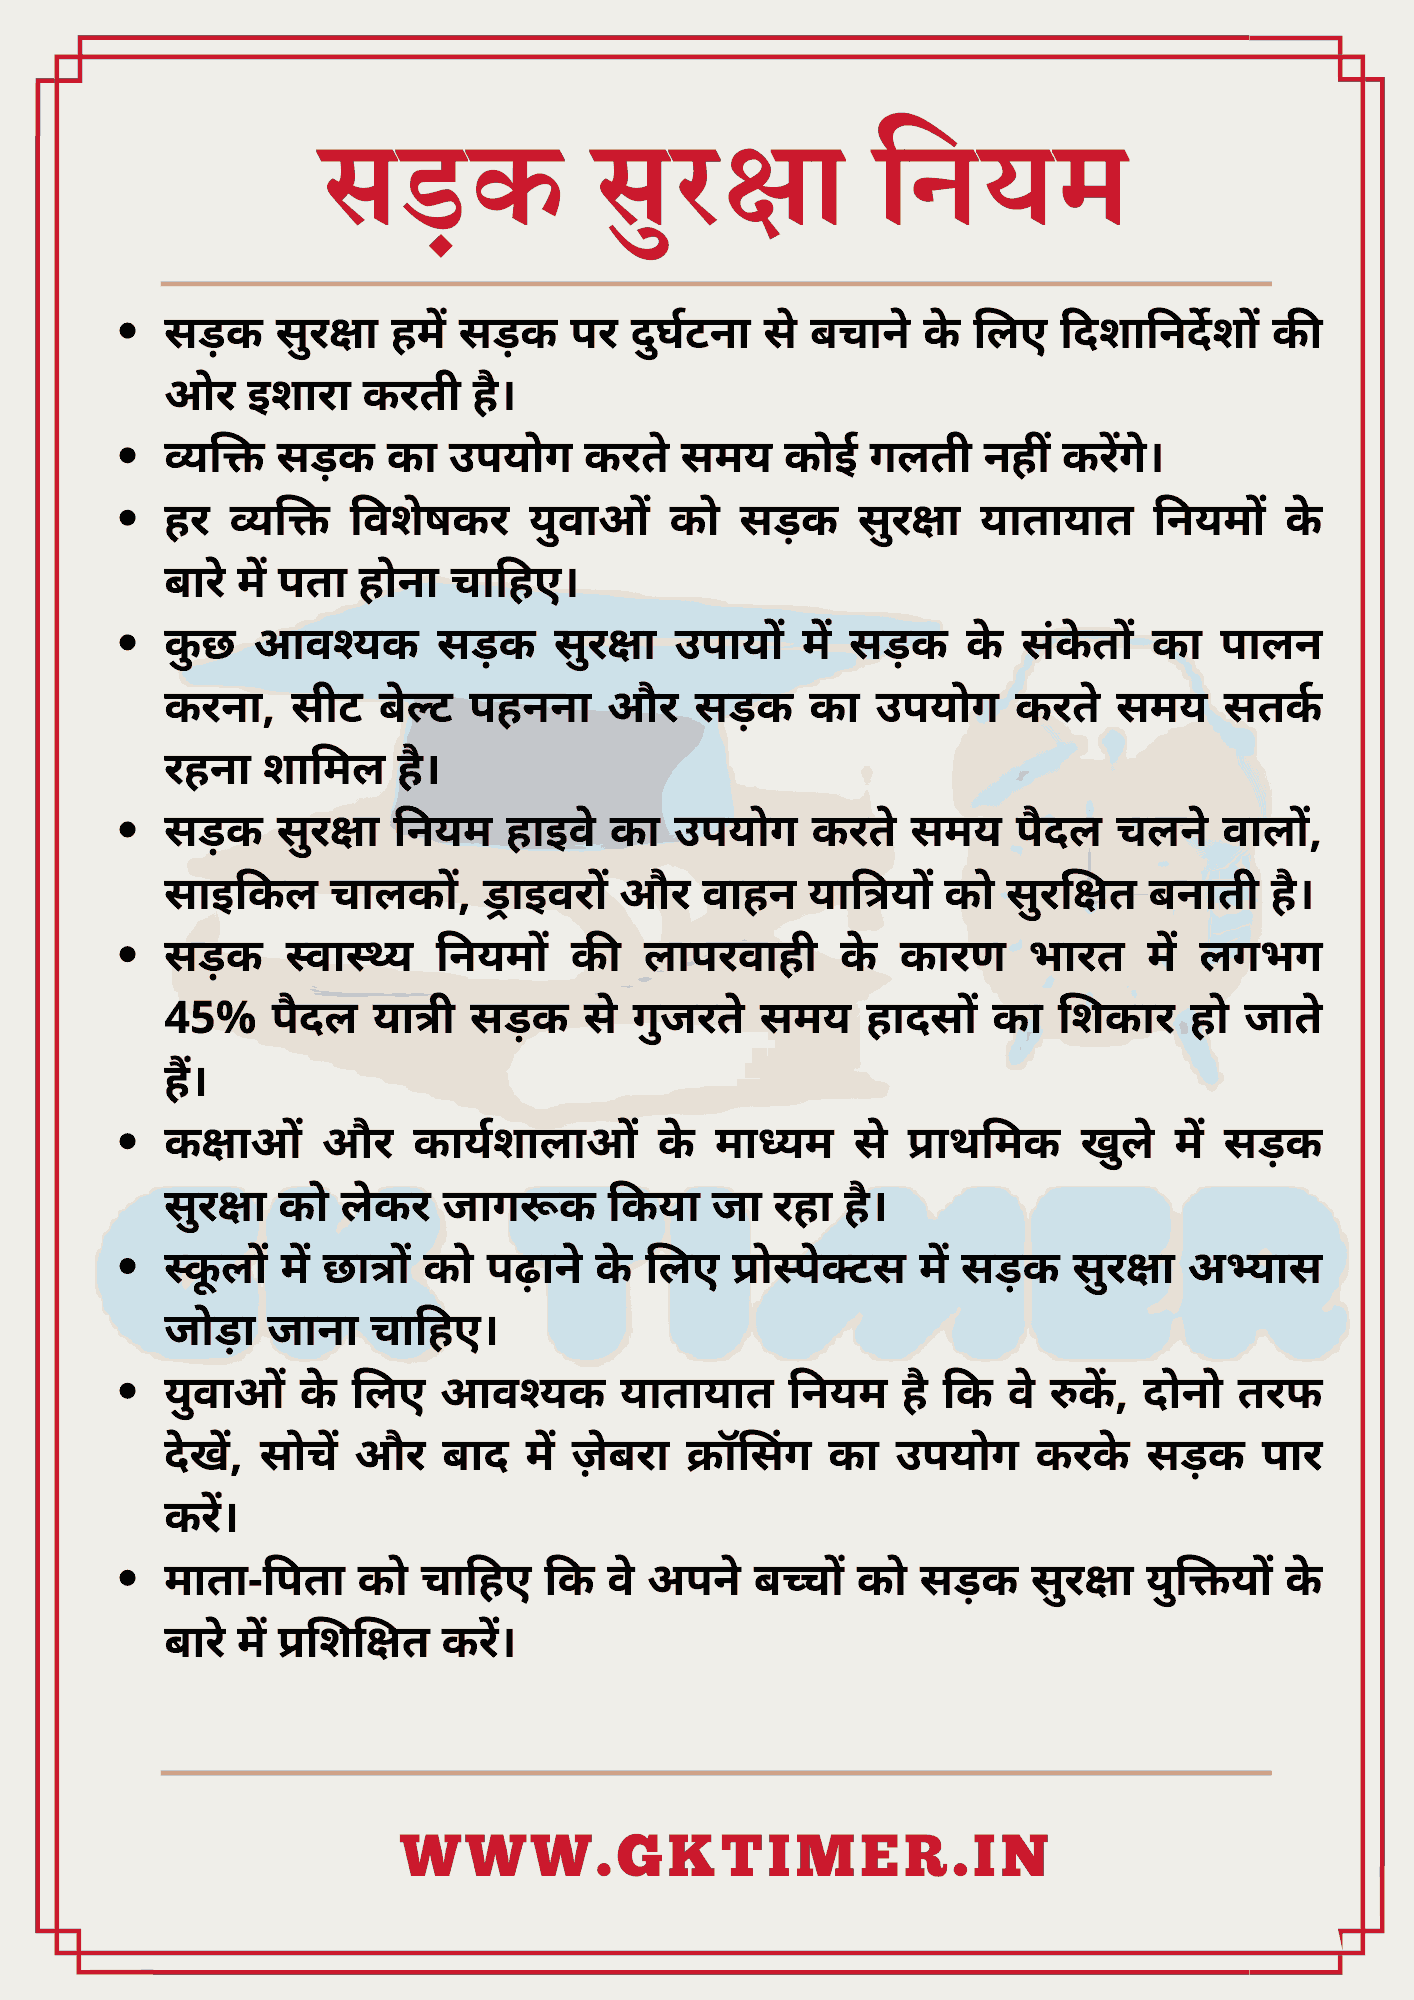 essay in road safety hindi